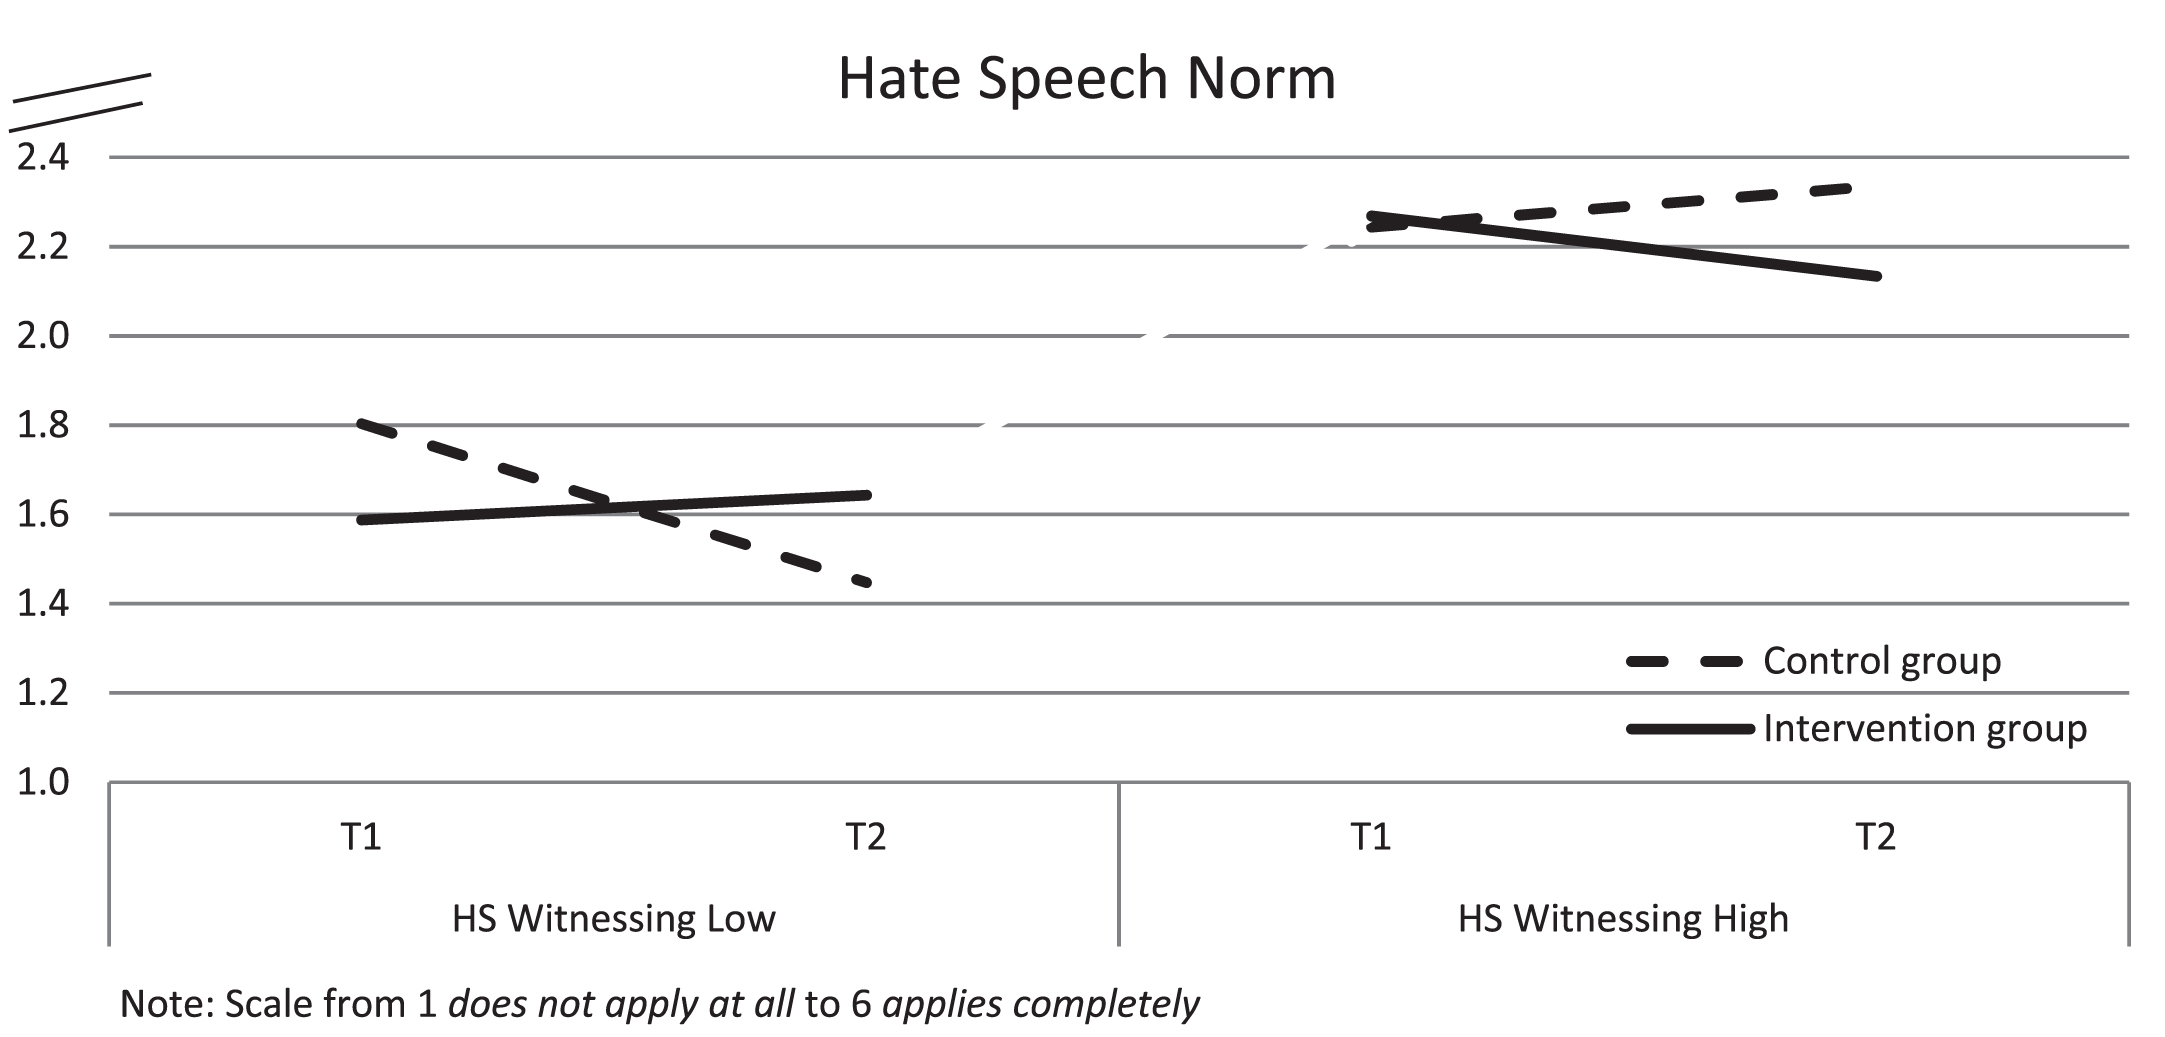 Online Hate Speech Norm in Both Groups Depending on the Frequency of Witnessing Online Hate Speech